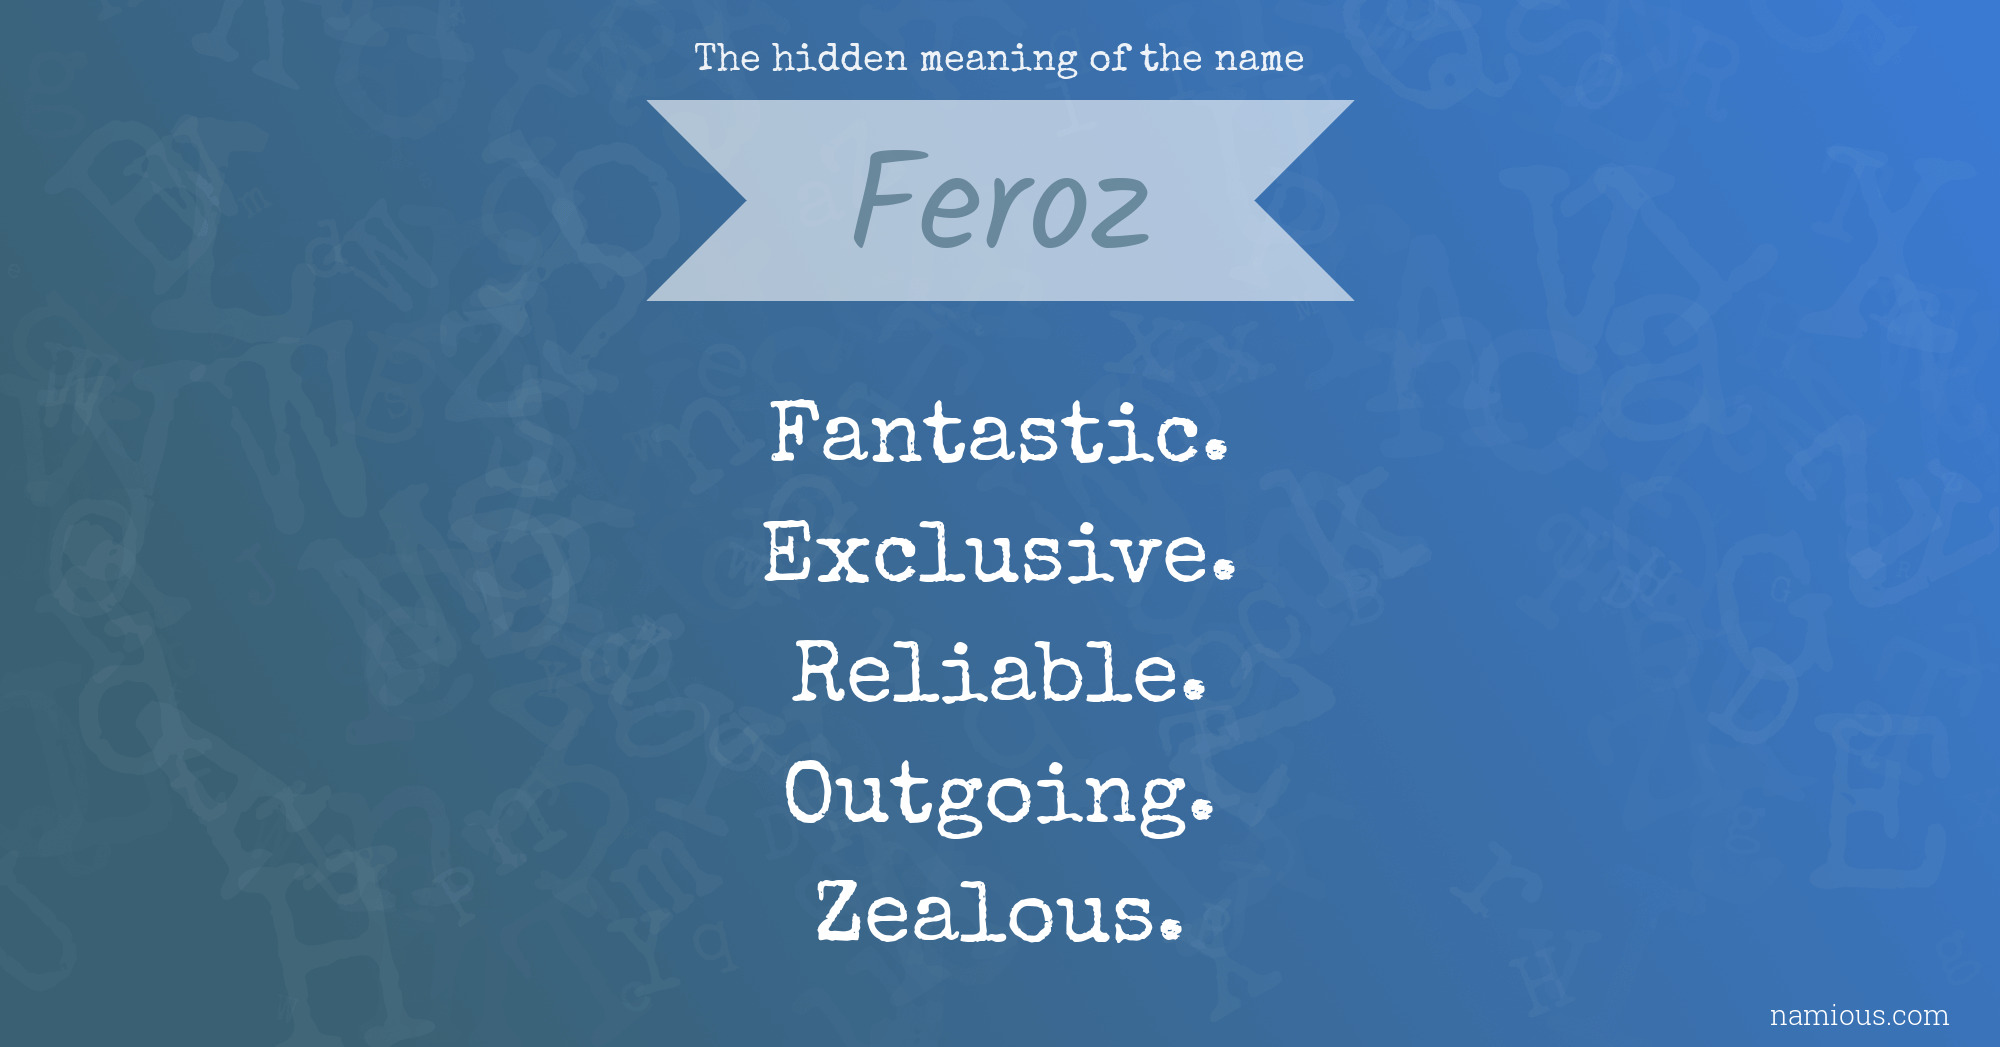 The hidden meaning of the name Feroz